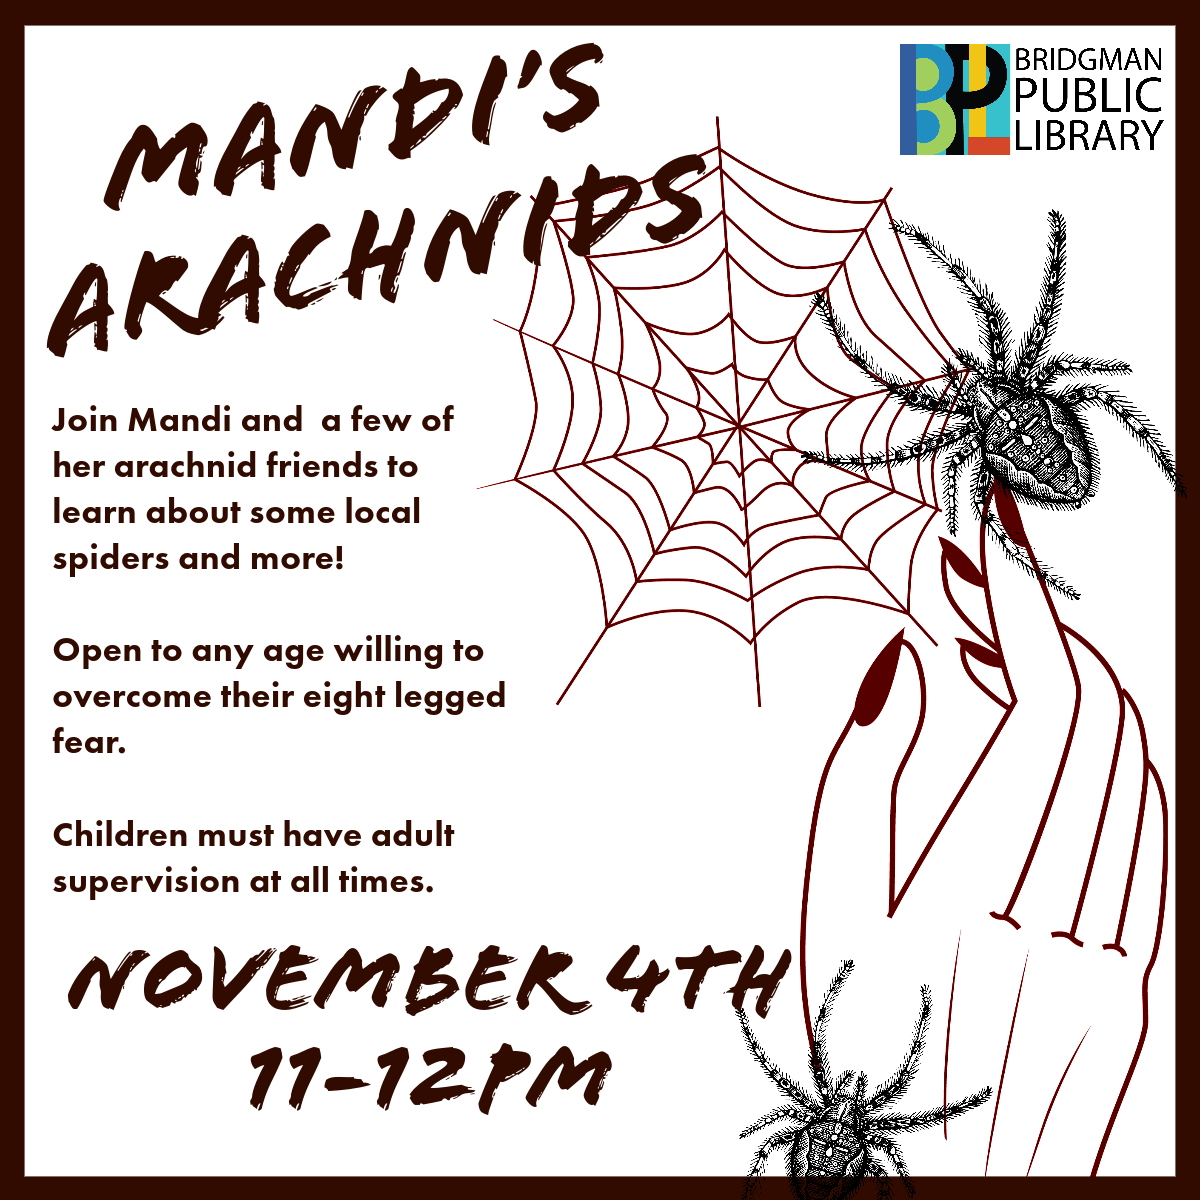 Open to any age, learn more about local spiders.